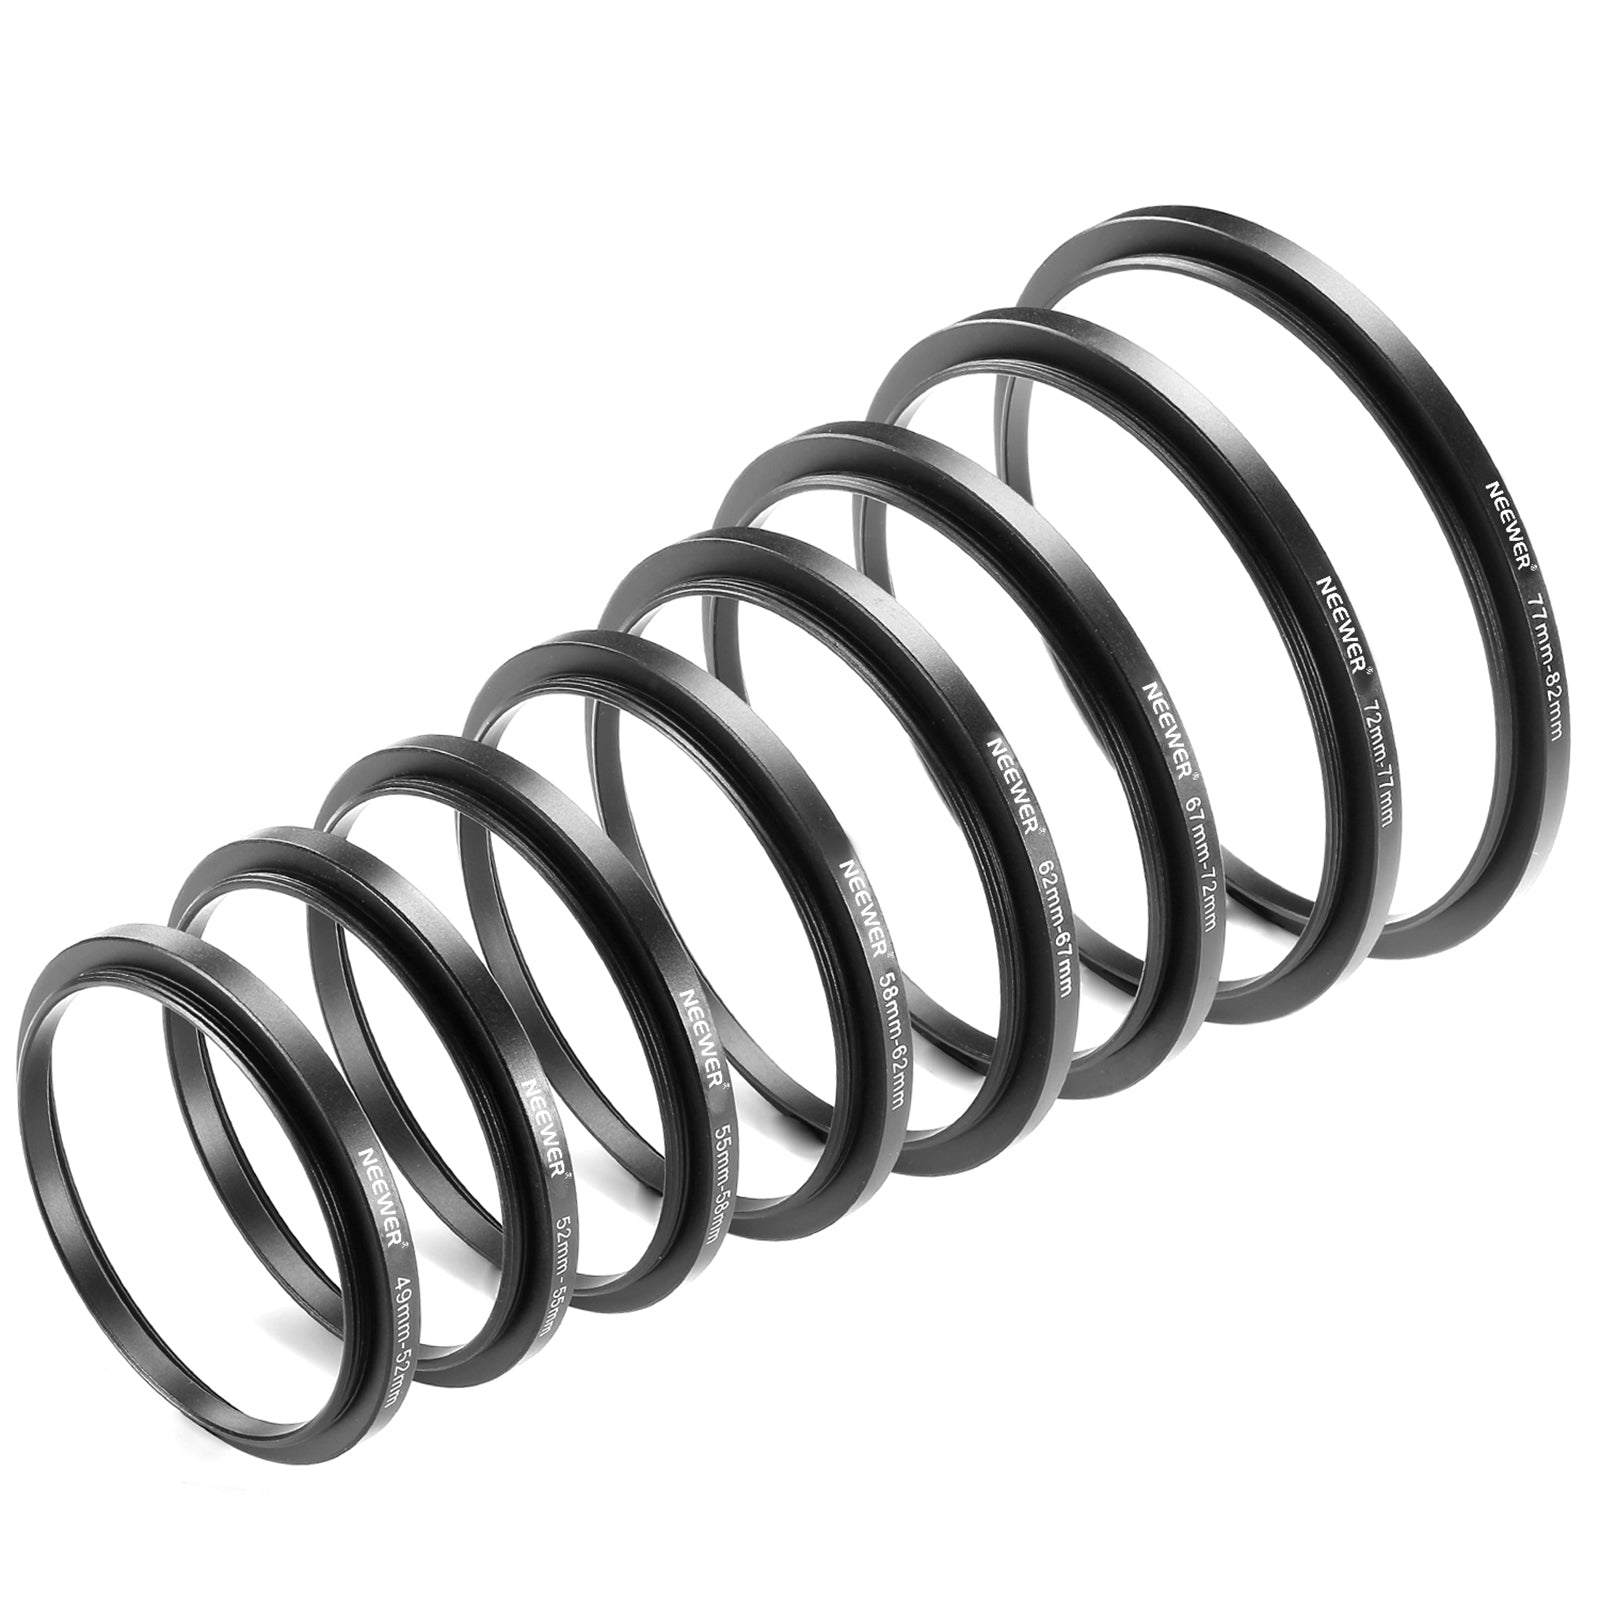 Neewer 8 Pieces Step-up Adapter Ring Set